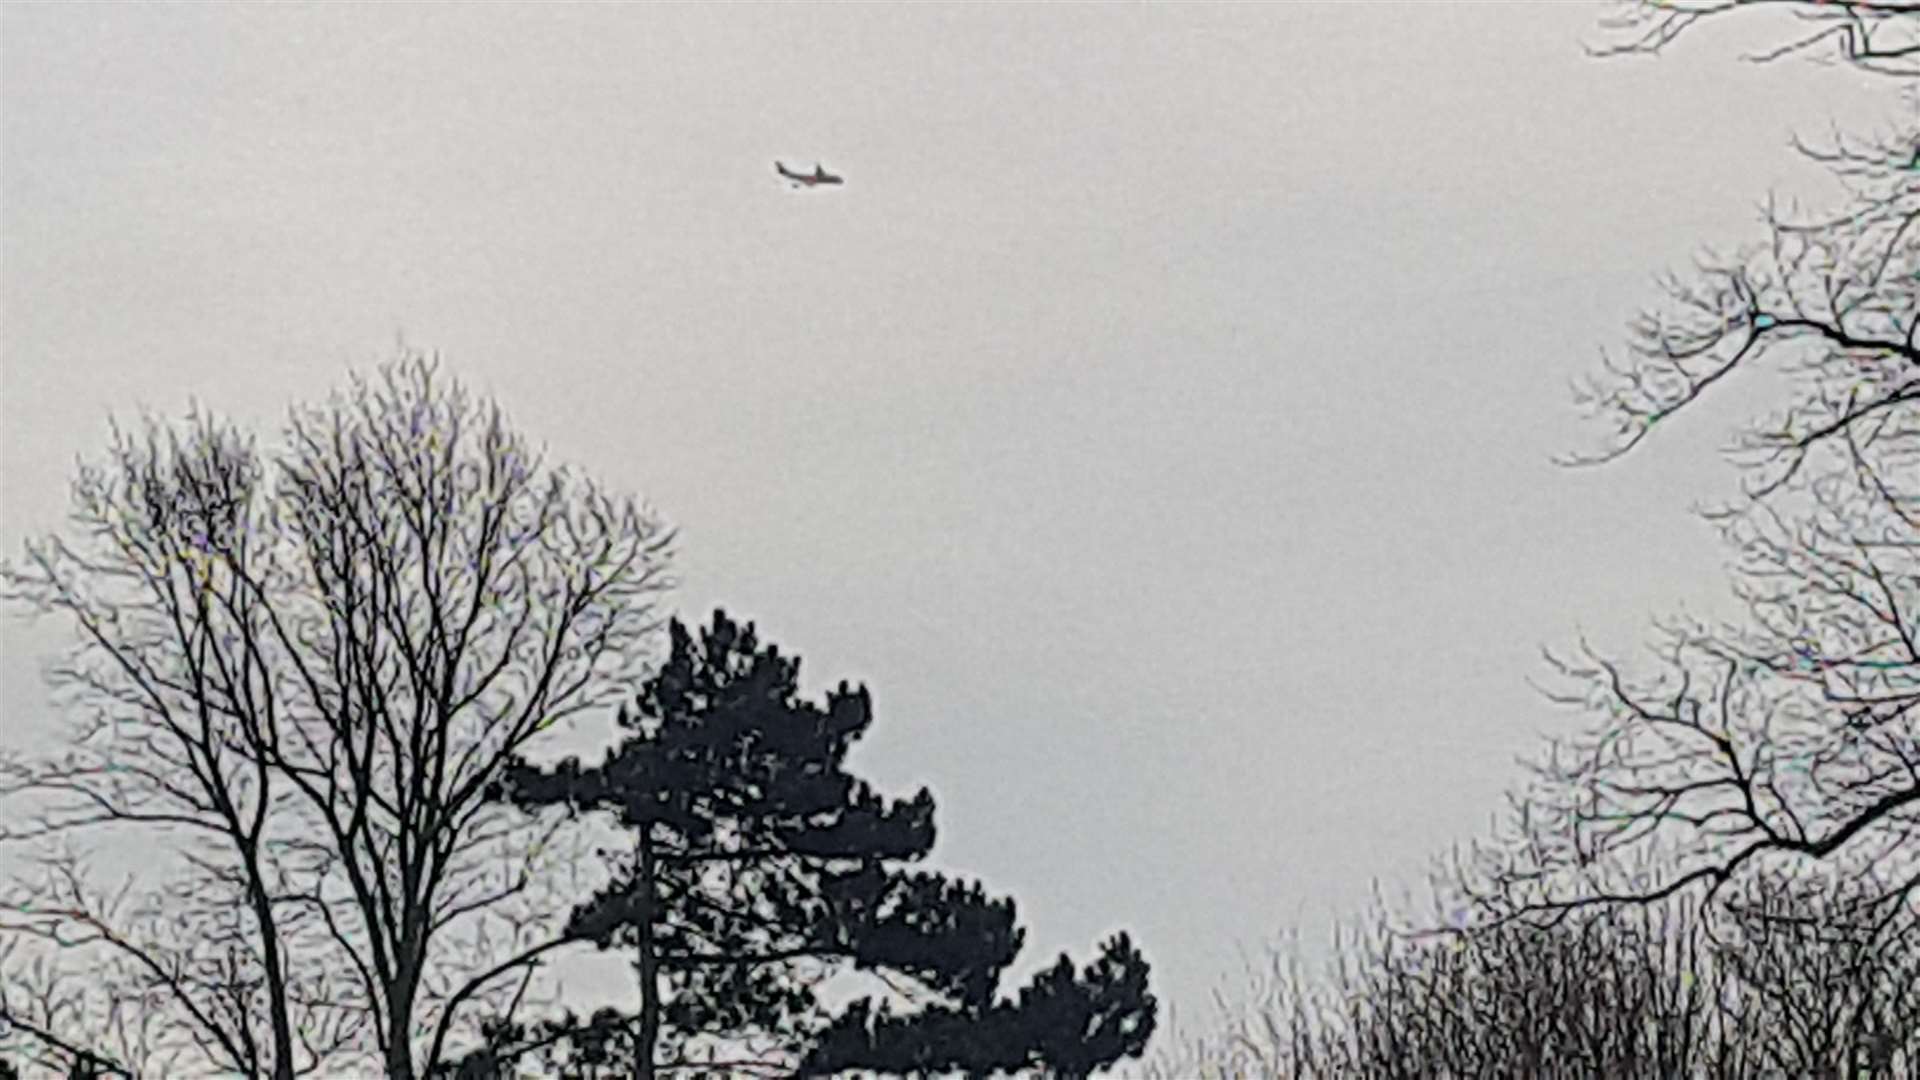 The passenger plane was over Canterbury for a lengthy duration of time